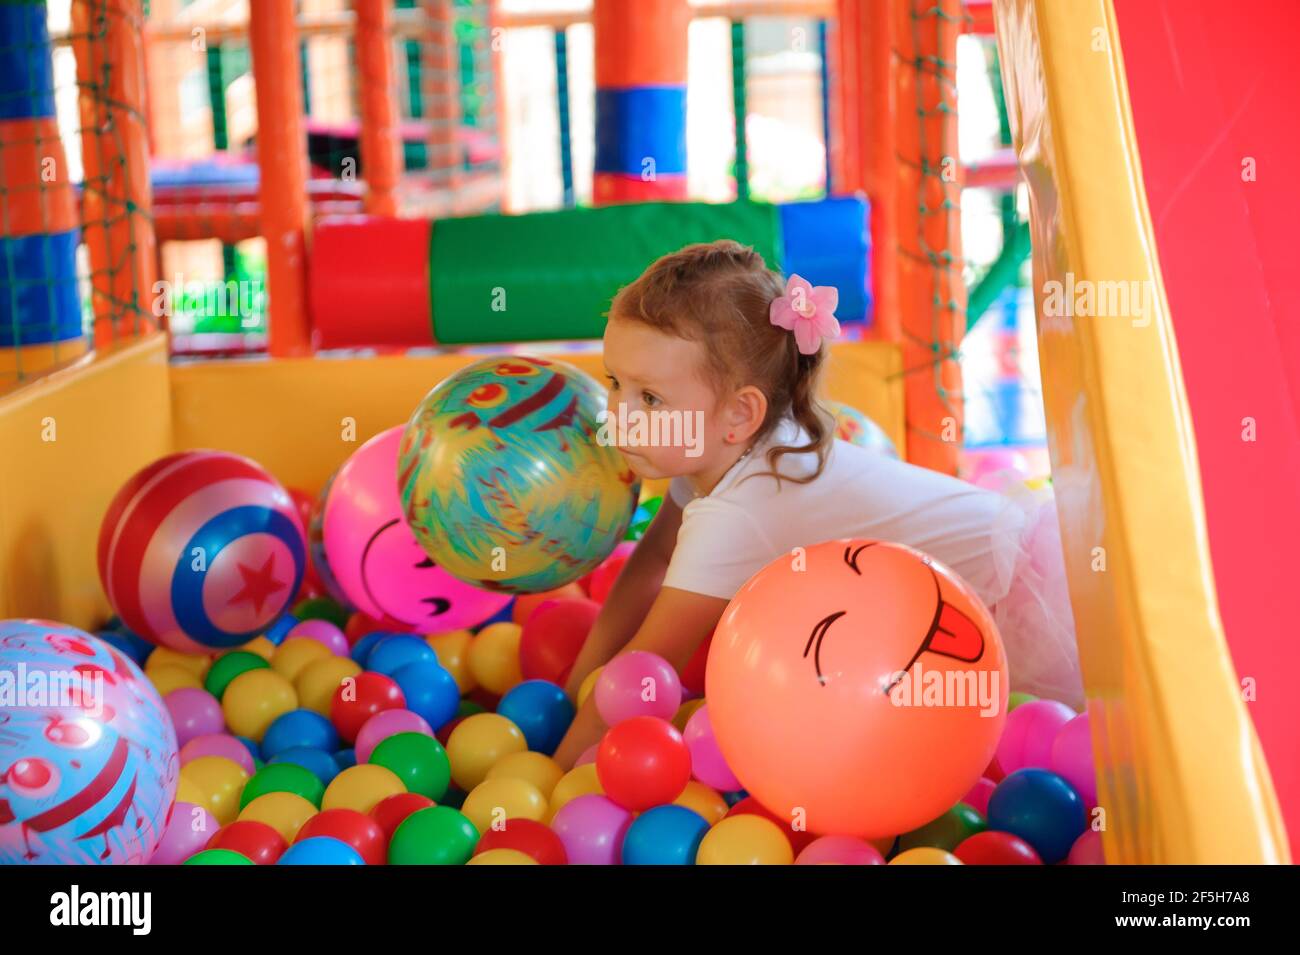 Indoor playground with colorful plastic balls for children. Stock Photo